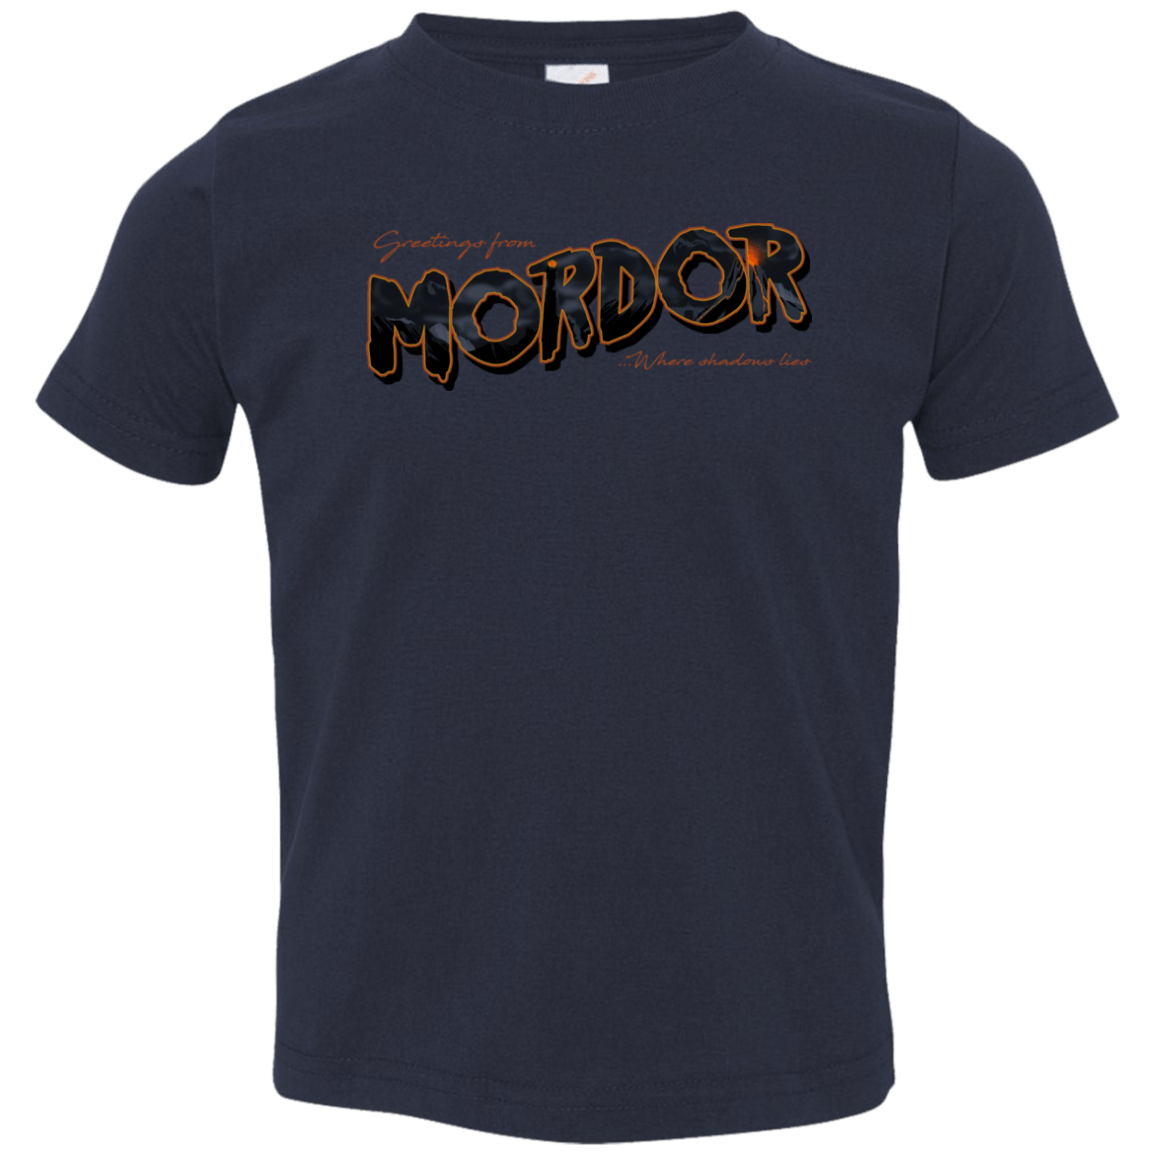 T-Shirts Navy / 2T Greetings From Mordor Toddler Premium T-Shirt